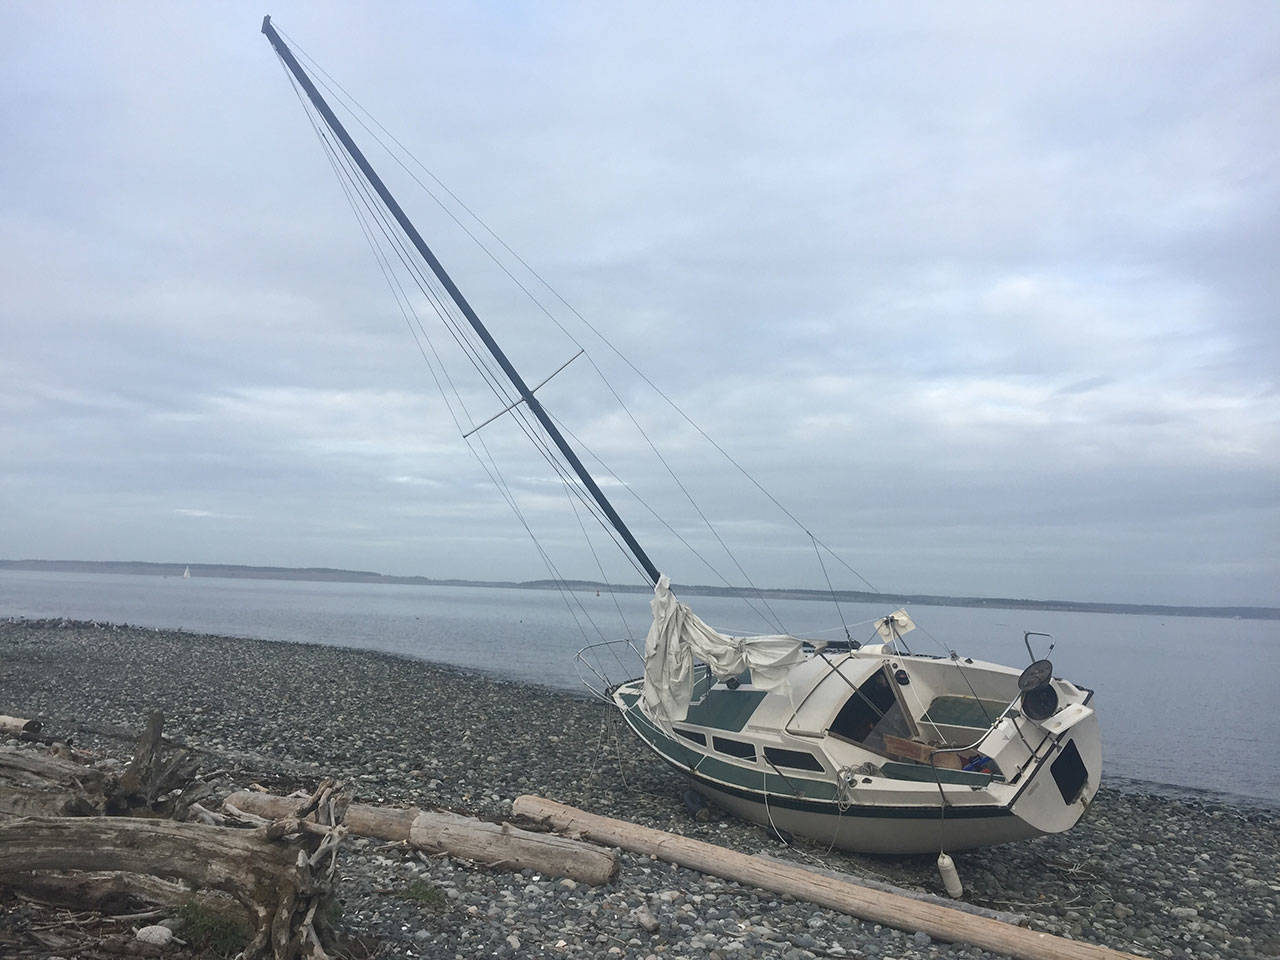 The Port of Port Townsend is considering what to do about a sailboat beached on the north side of Point Hudson. (Cydney McFarland/Peninsula Daily News)